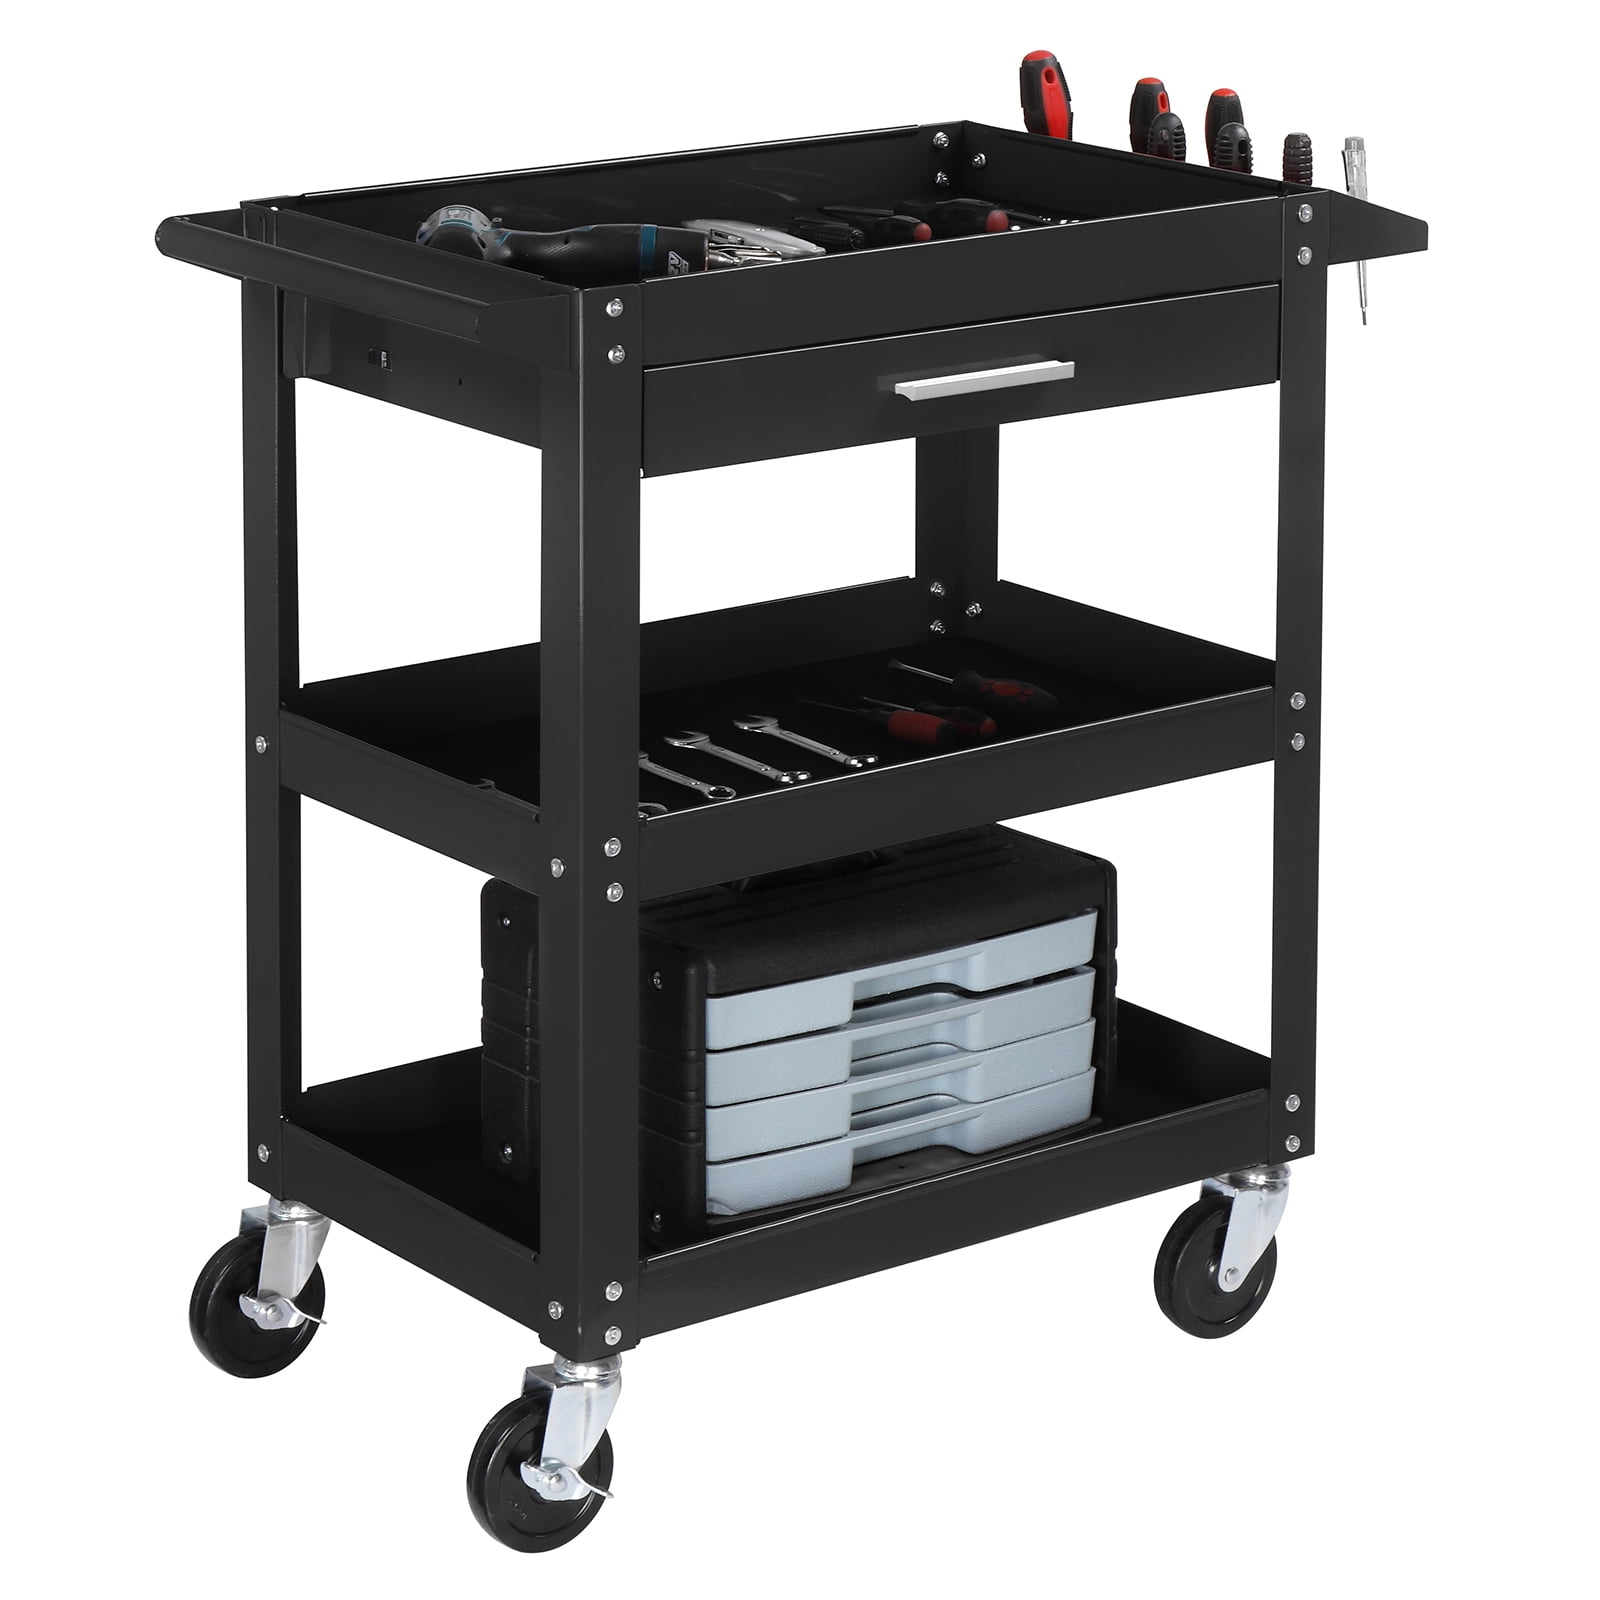 FITHOIST 3-Tier Rolling Tool Cart, 330lbs Metal Mechanic Tool Cart on Wheels, Heavy Duty Rolling Carts with Wheels, Utility Service Carts for